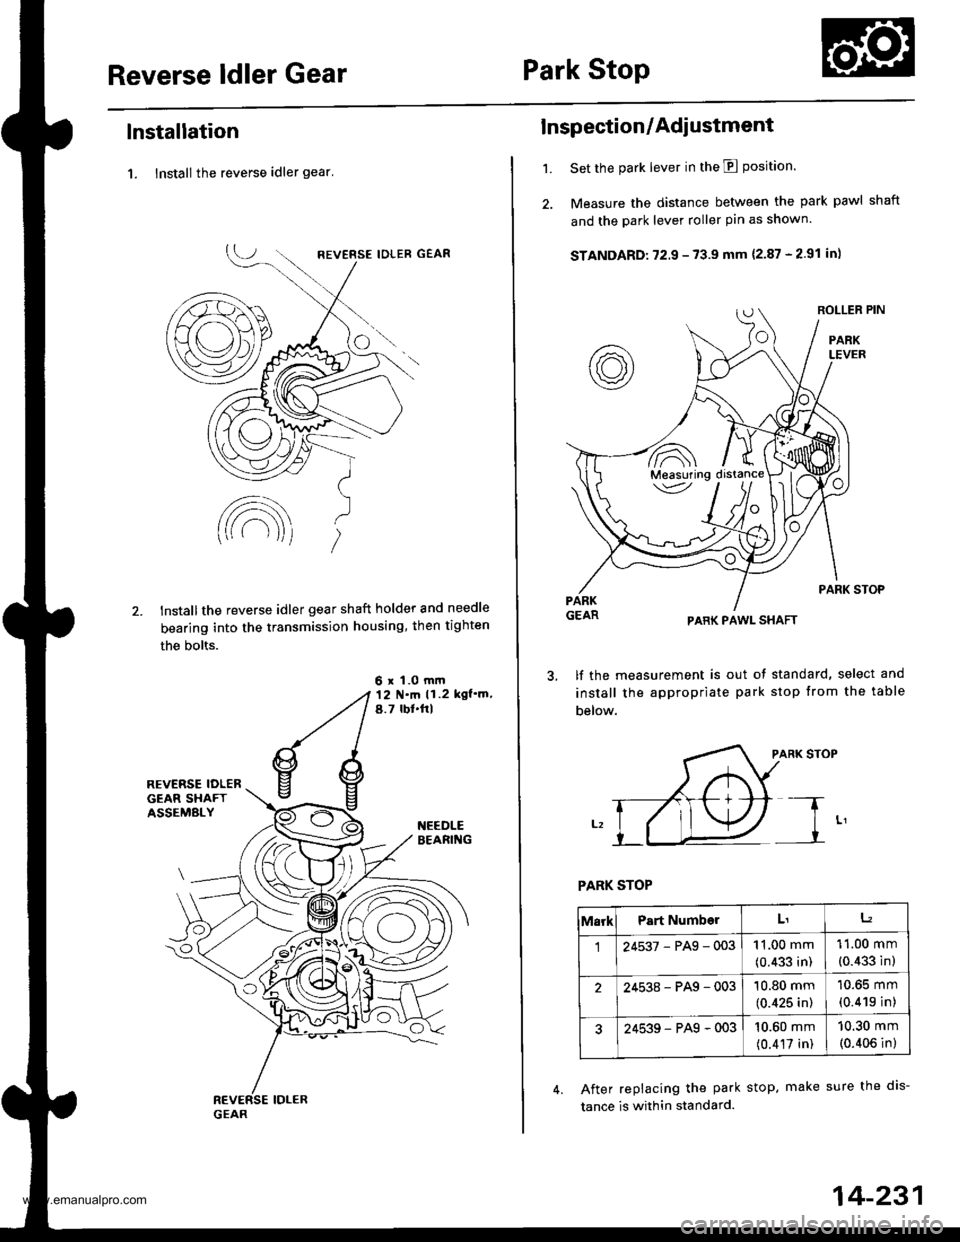 HONDA CR-V 1999 RD1-RD3 / 1.G Workshop Manual 
Reverse ldler GearPark Stop
lnstallation
1. lnstall the reverse idler gear
lnstallthe reverse idler gear shaft holder and needle
bearing into the transmission housing, then tighten
the bolts.
6 x 1.